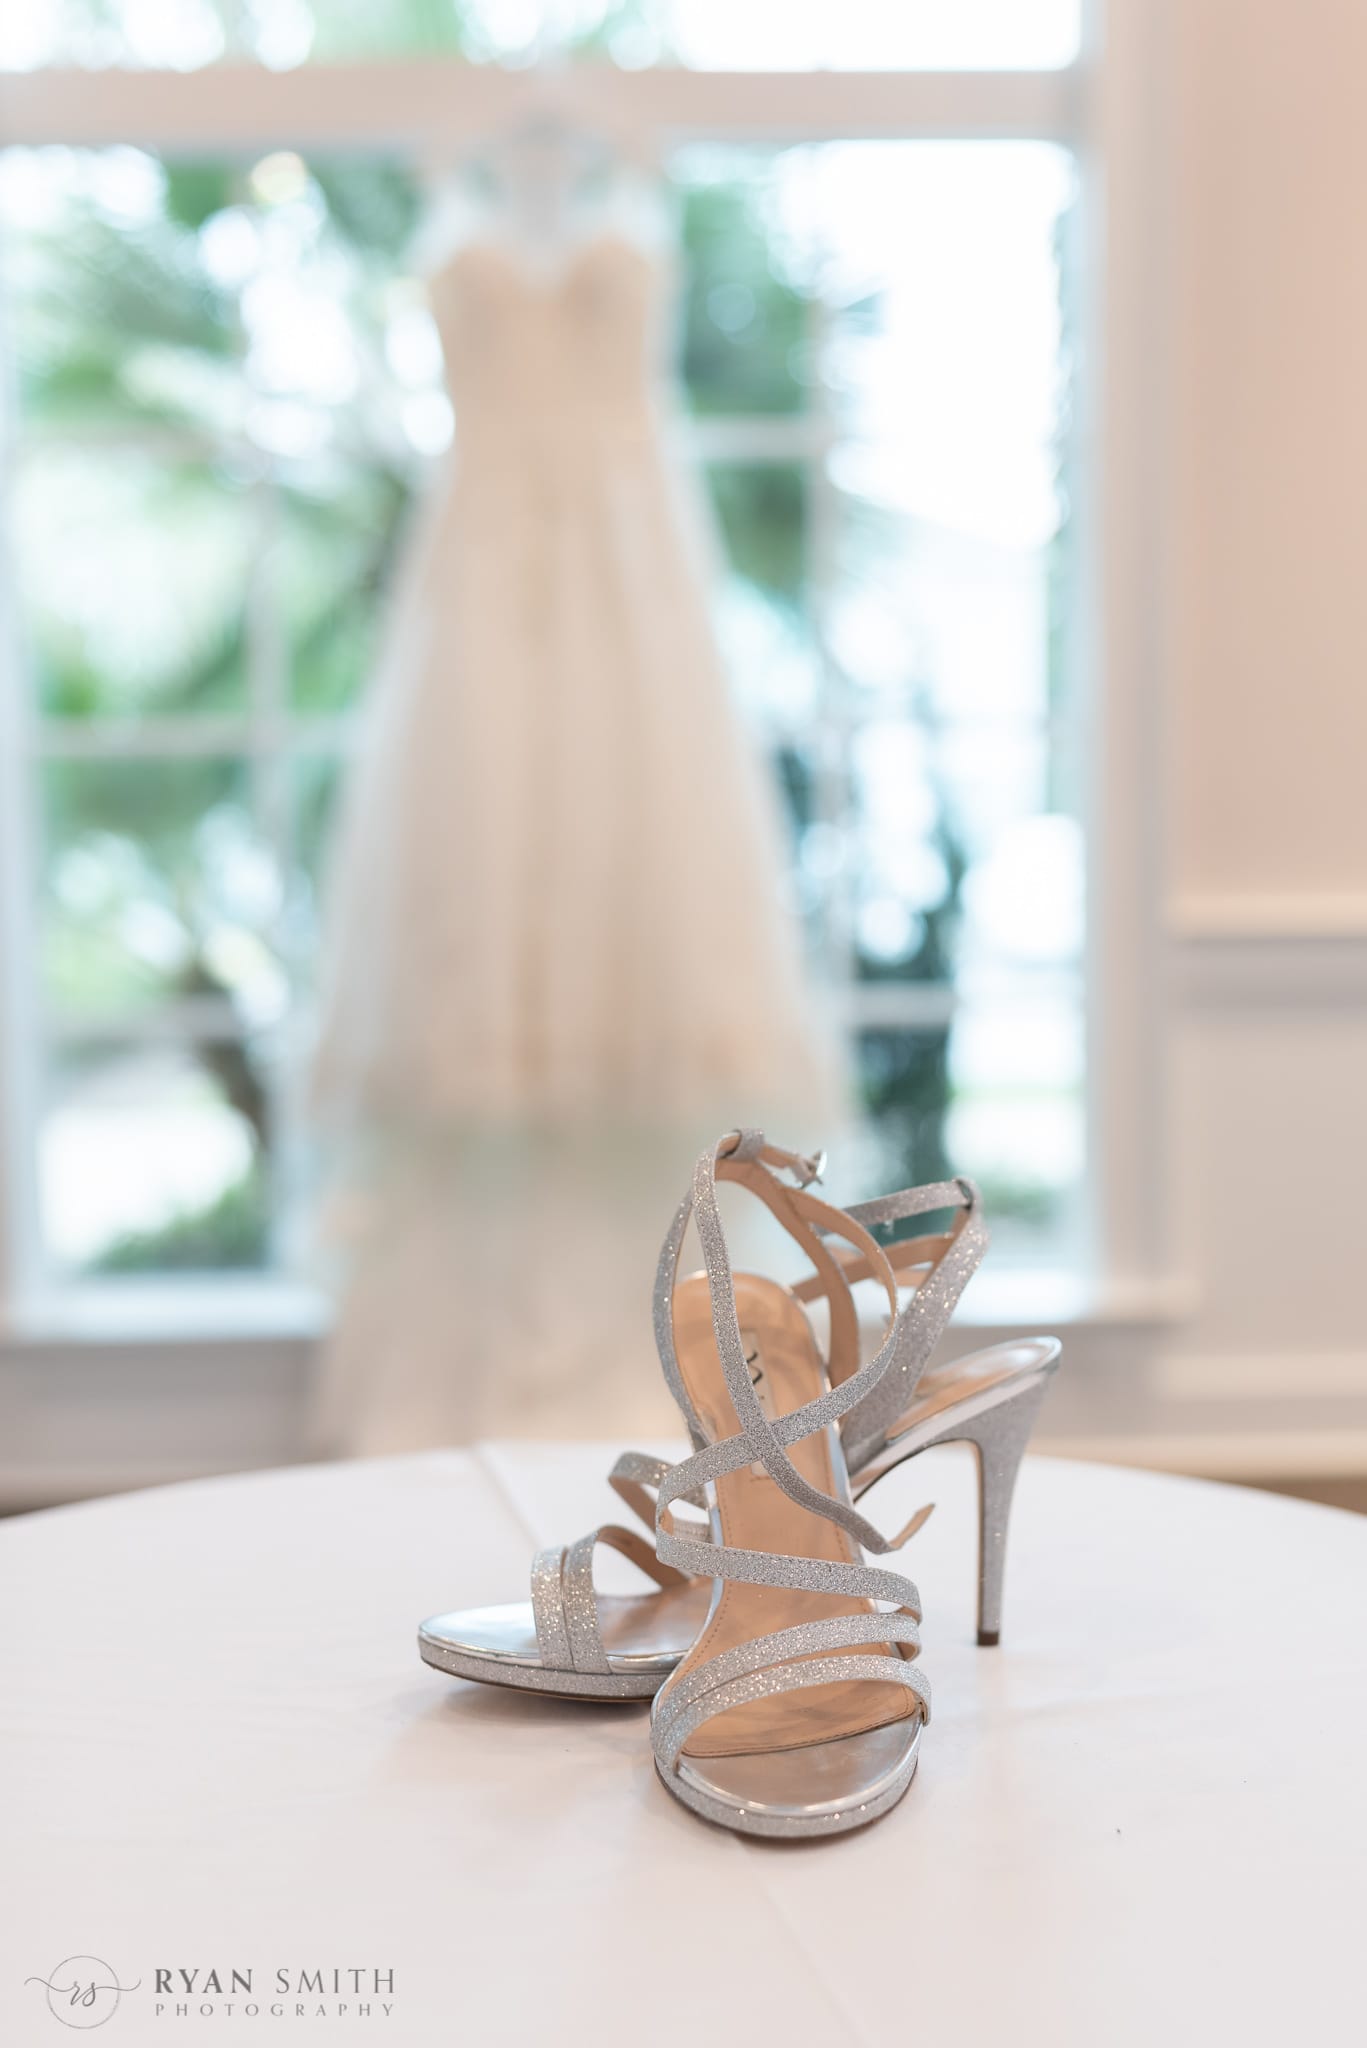 Bride's shoes in focus with dress hanging in the background - 21 Main Events at North Beach